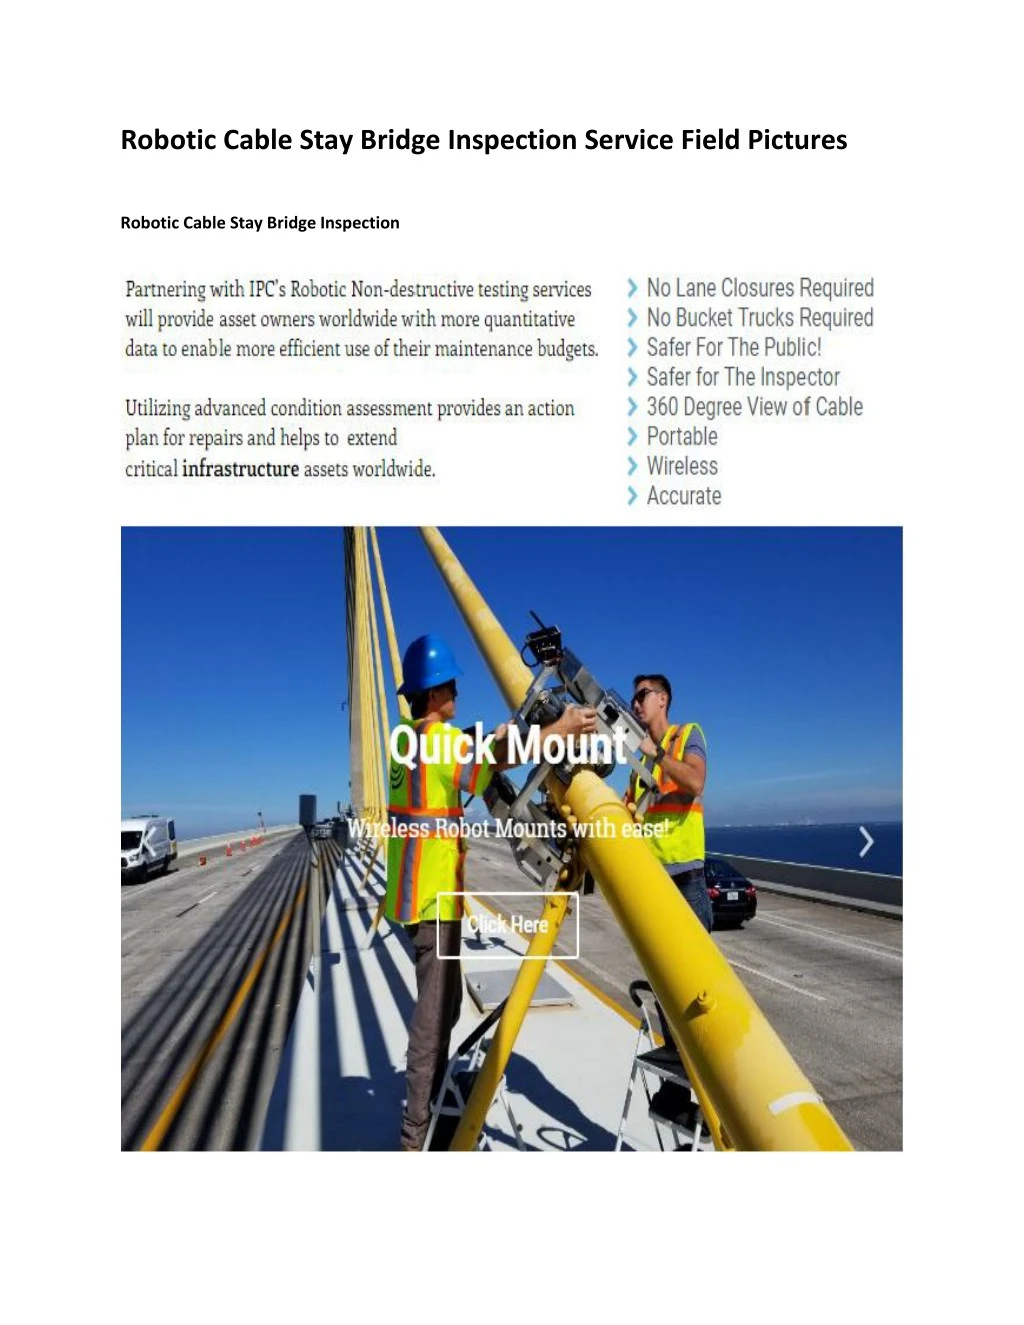 robotic cable stay bridge inspection service